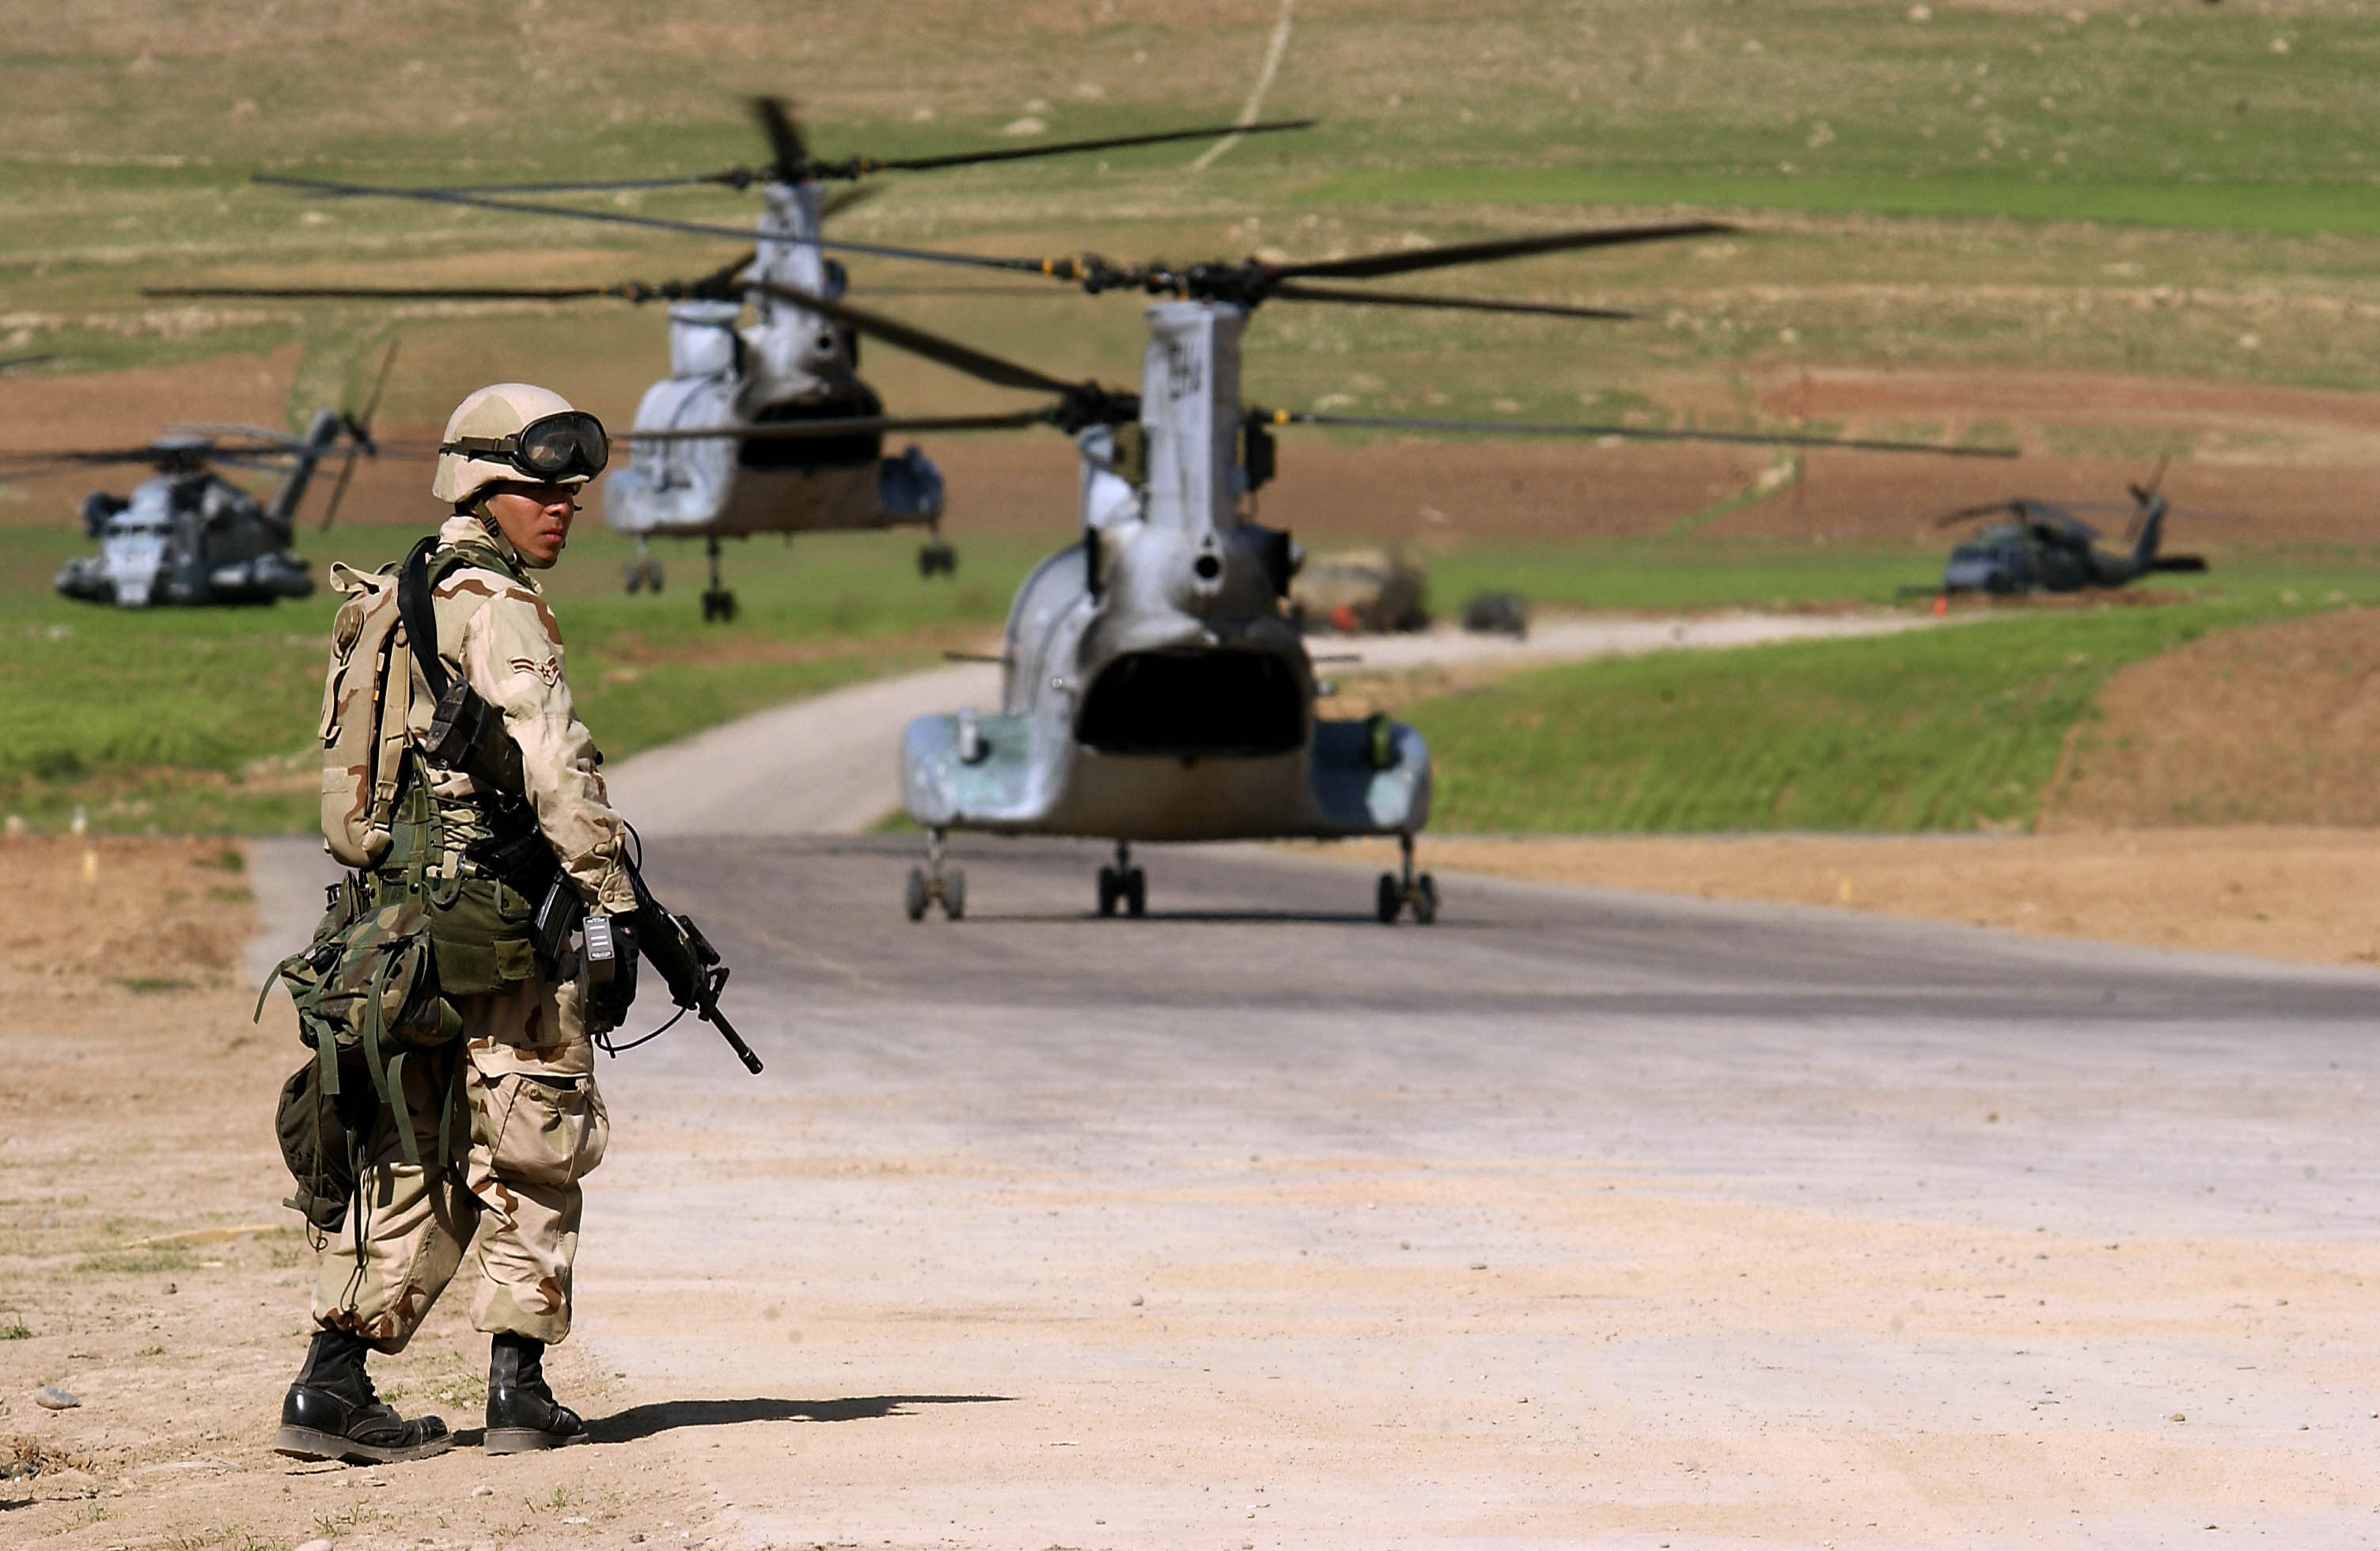 soldiers, military, helicopters, vehicles - desktop wallpaper